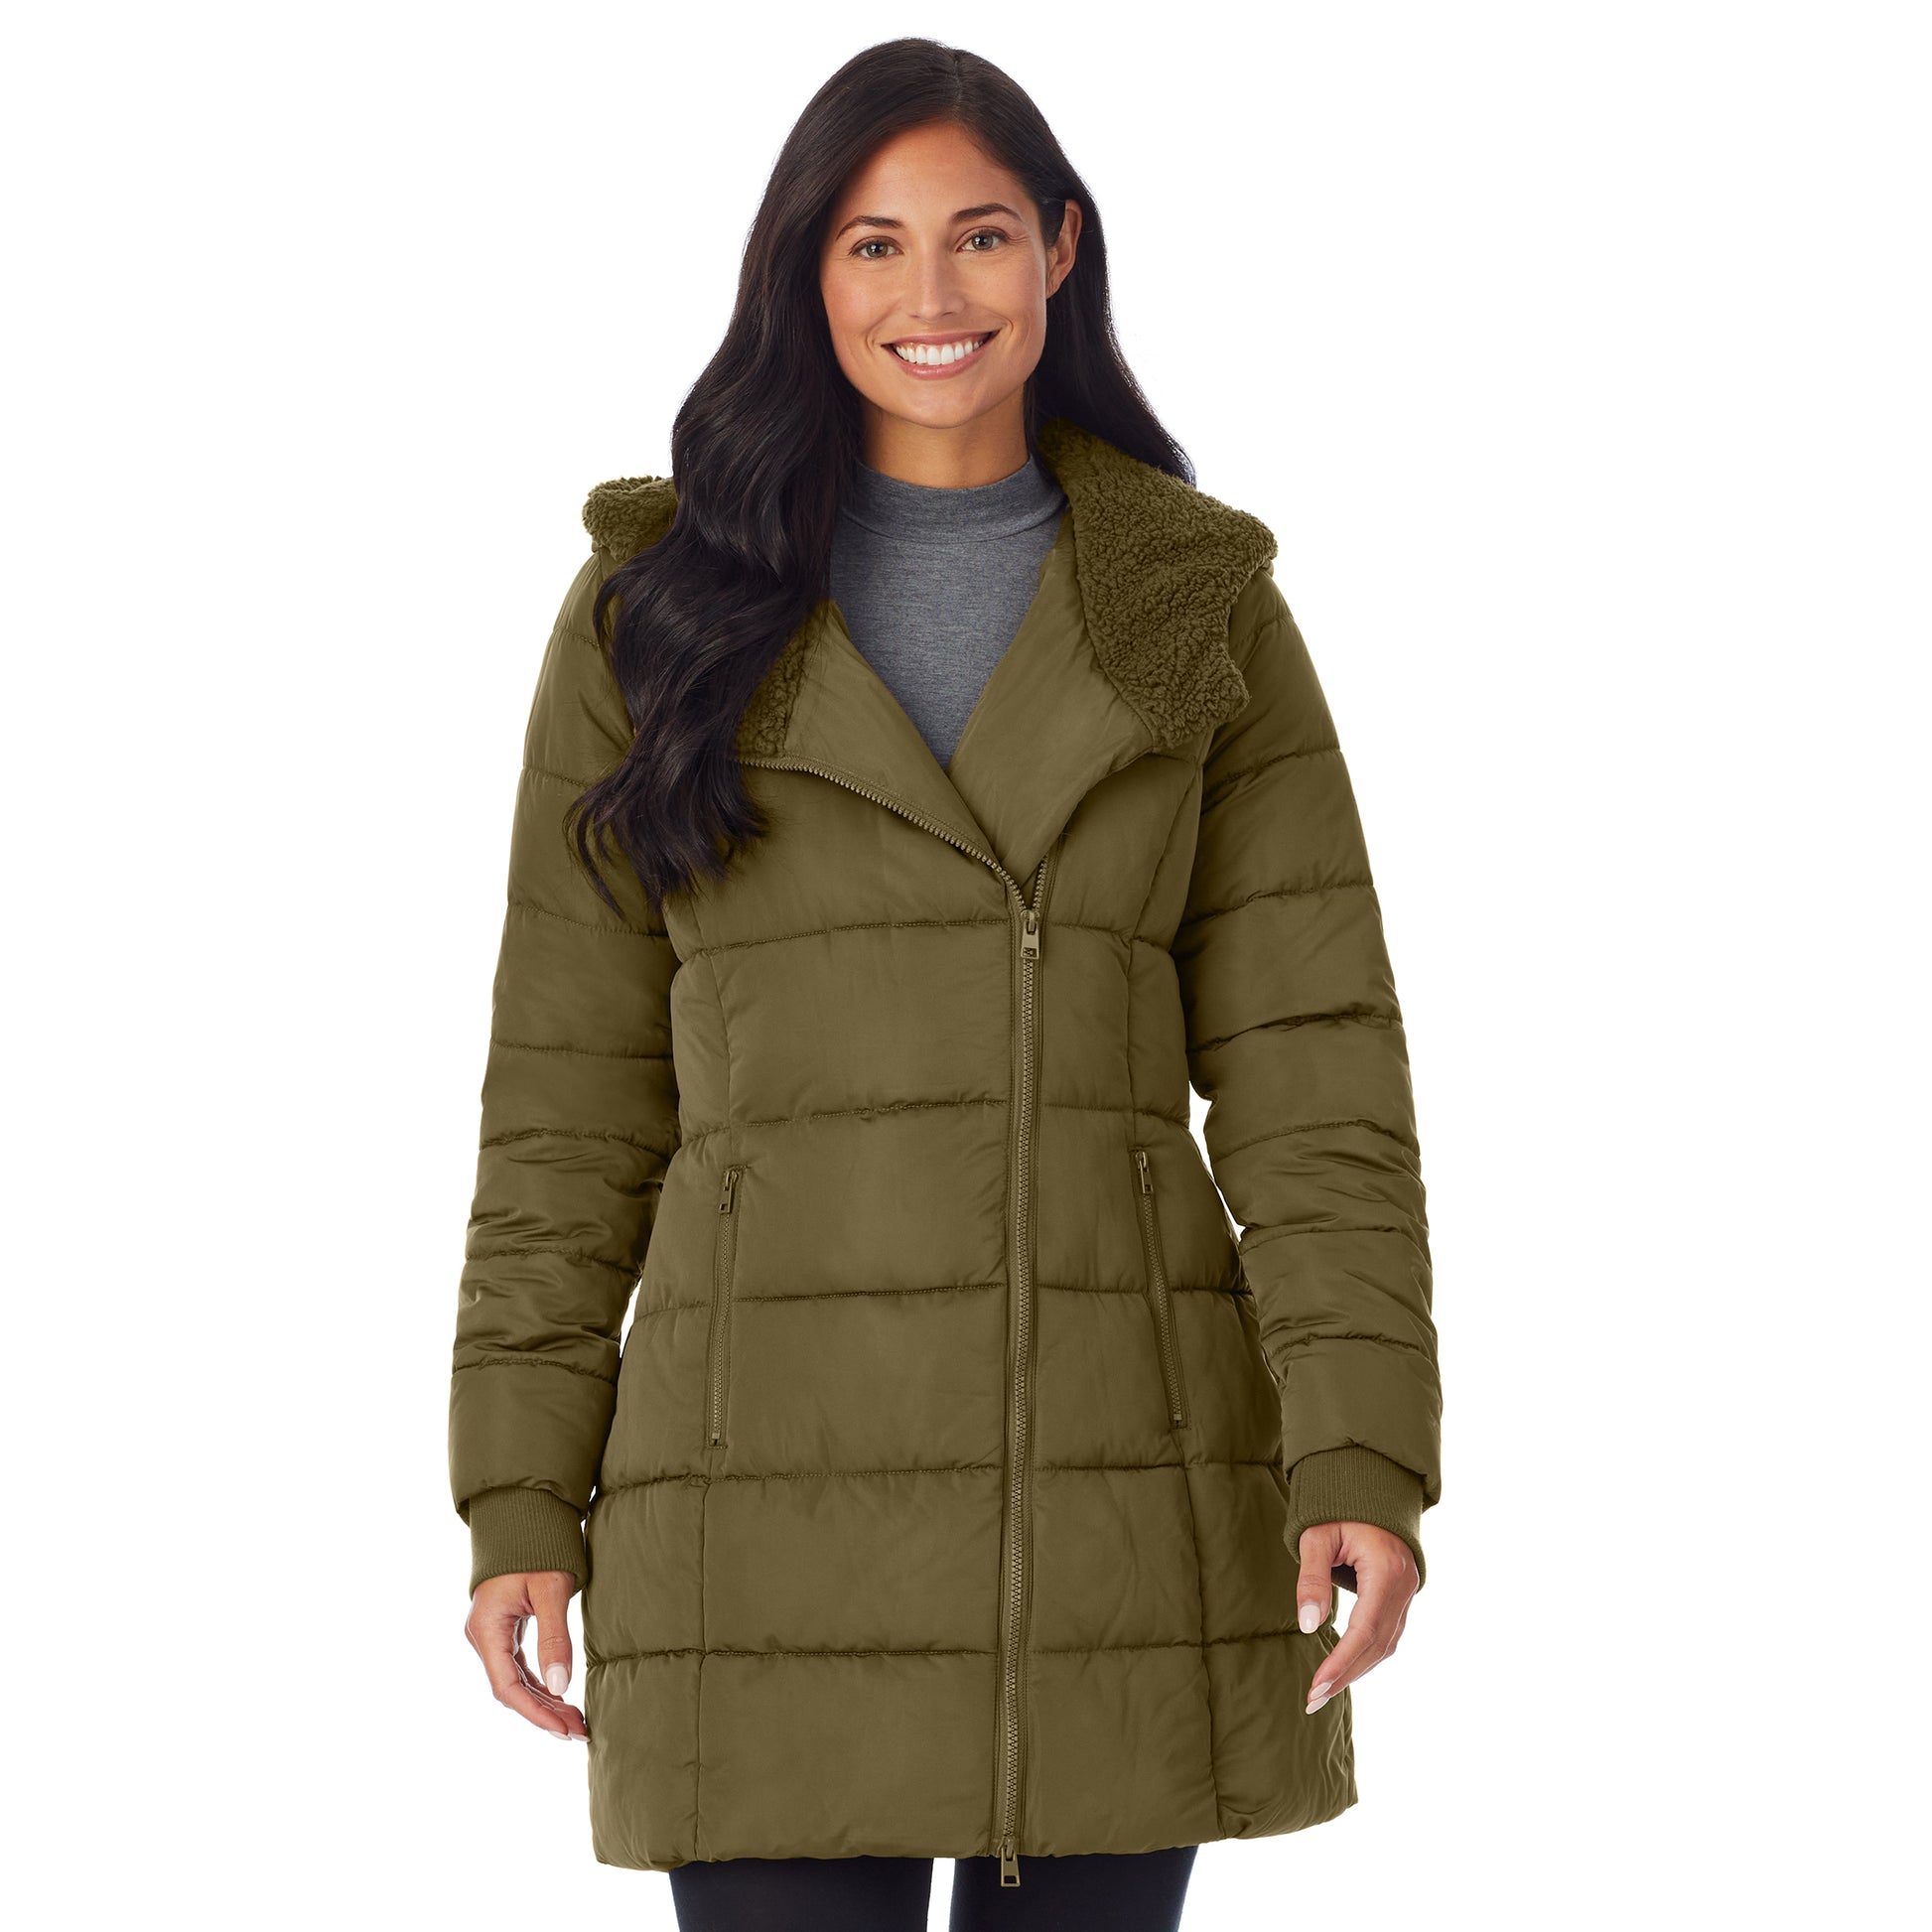 Rich Olive; Model is wearing size S. She is 5'8.5", Bust 32", Waist 25", Hips 36".@upper body of a lady wearing olive long puffer coat